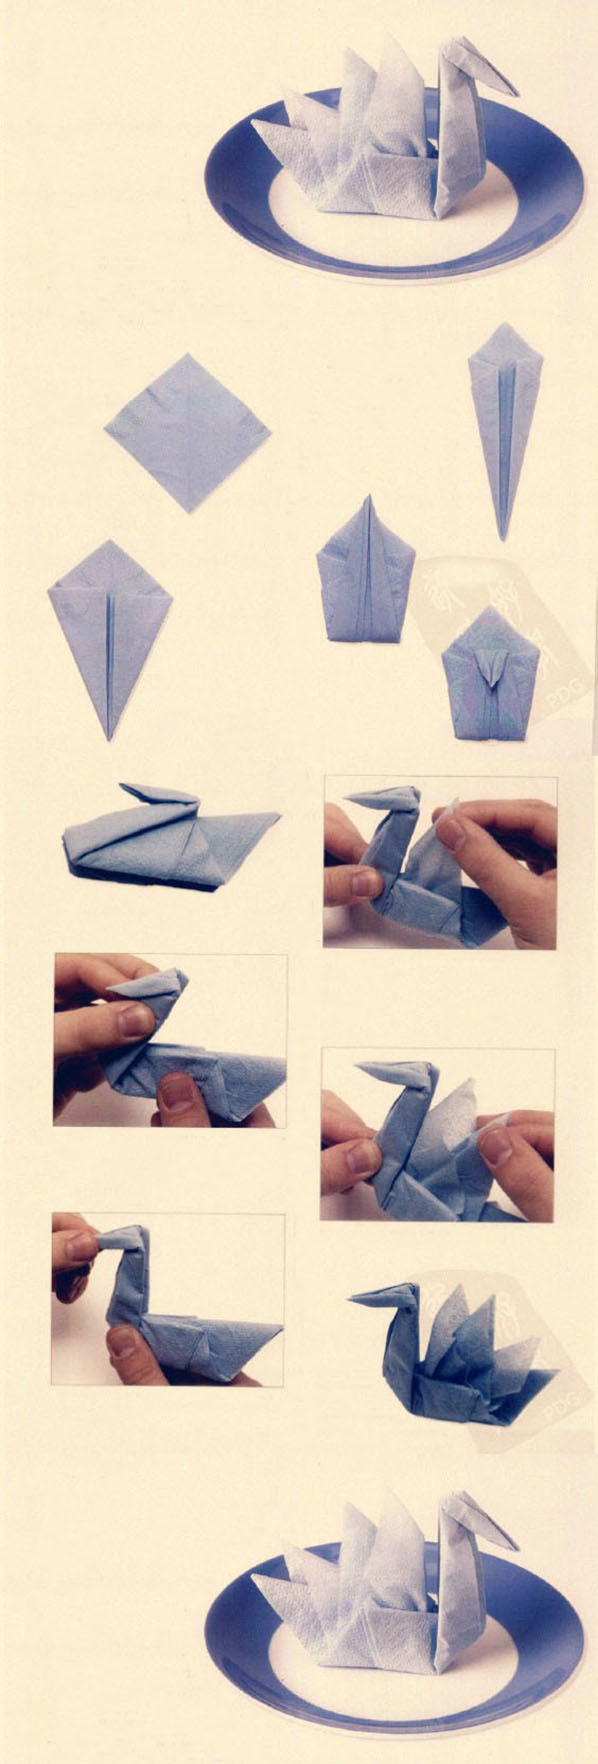 AD-Napkin-Folding-Techniques-That-Will-Transform-Your-Dinner-Table-04